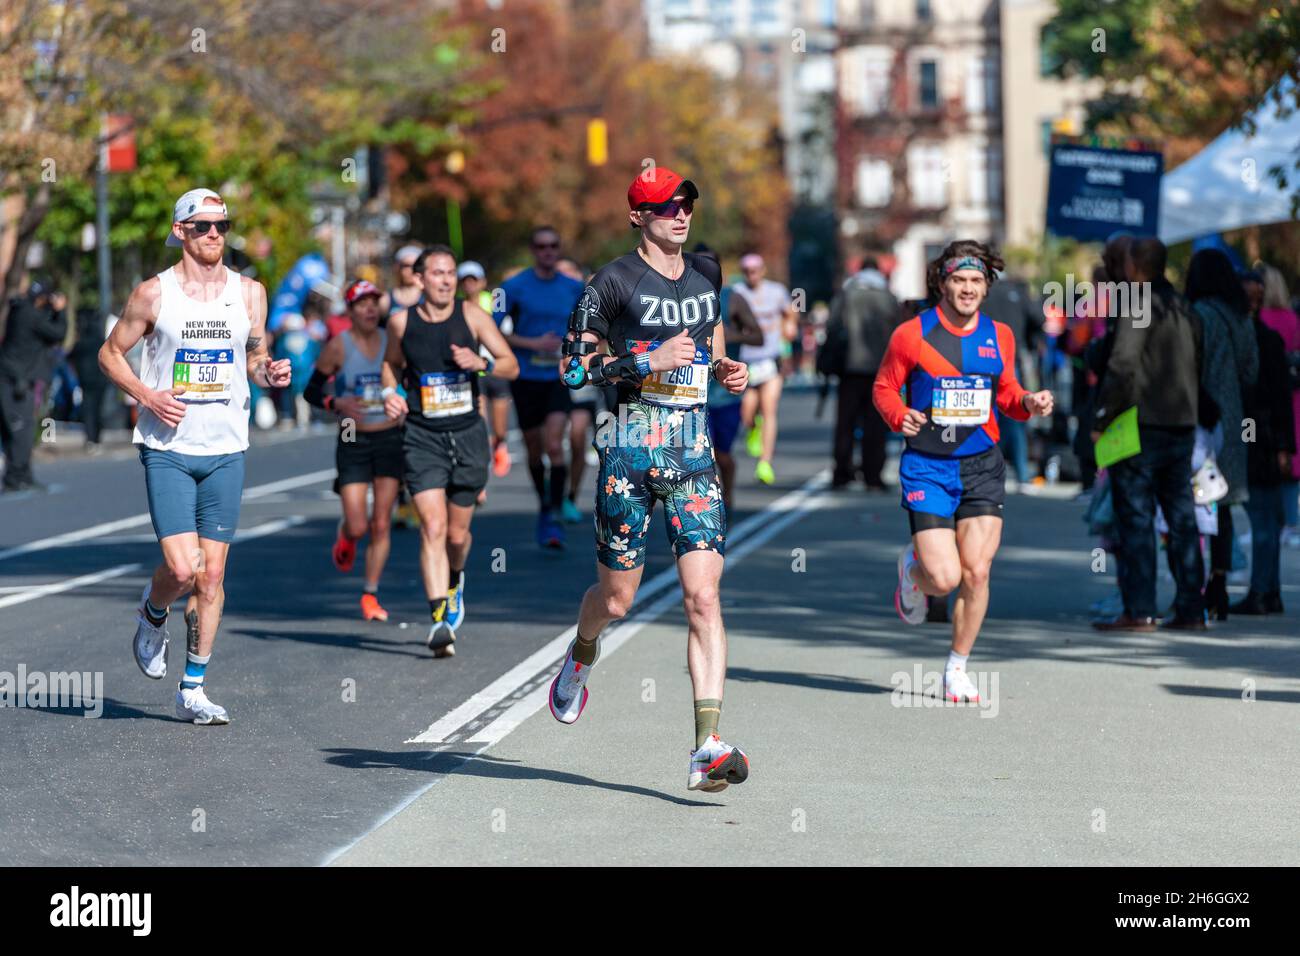 Runners pass through Harlem in New York near the 22 mile mark near Mount Morris Park on Sunday, November 7, 2019 in the 50th running of the TCS New York City Marathon. About 30,000 runners. down from the usual 50,000, participated in the race which was cancelled last year due to the pandemic.  (© Richard B. Levine) Stock Photo